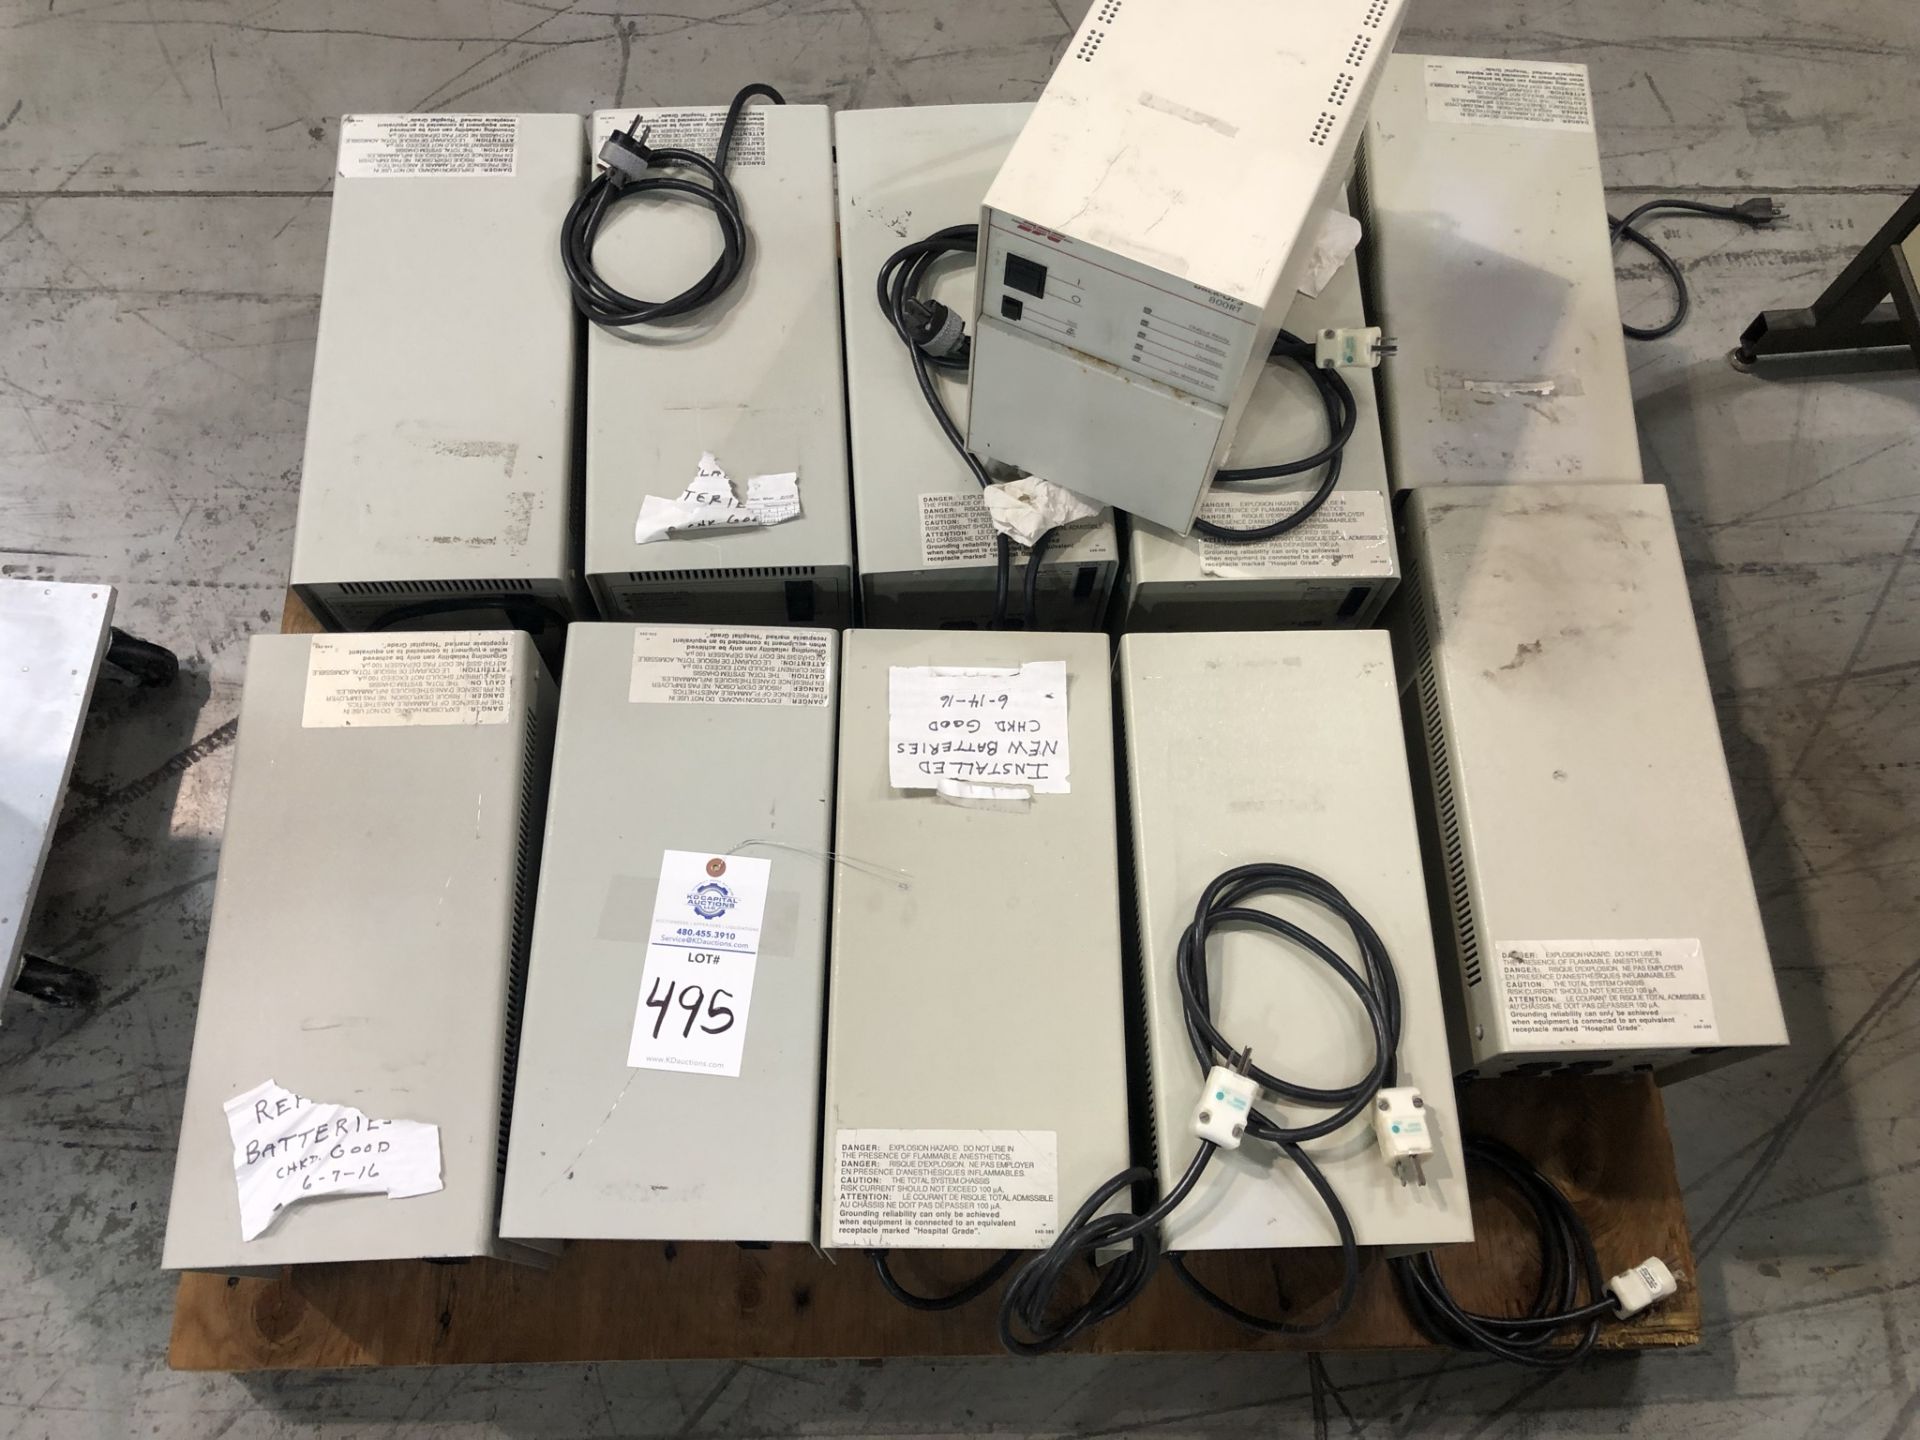 Oneac Corp., Quantity 10, Model UP1103, Uninterruptable Power Supplies (see detail PDF)